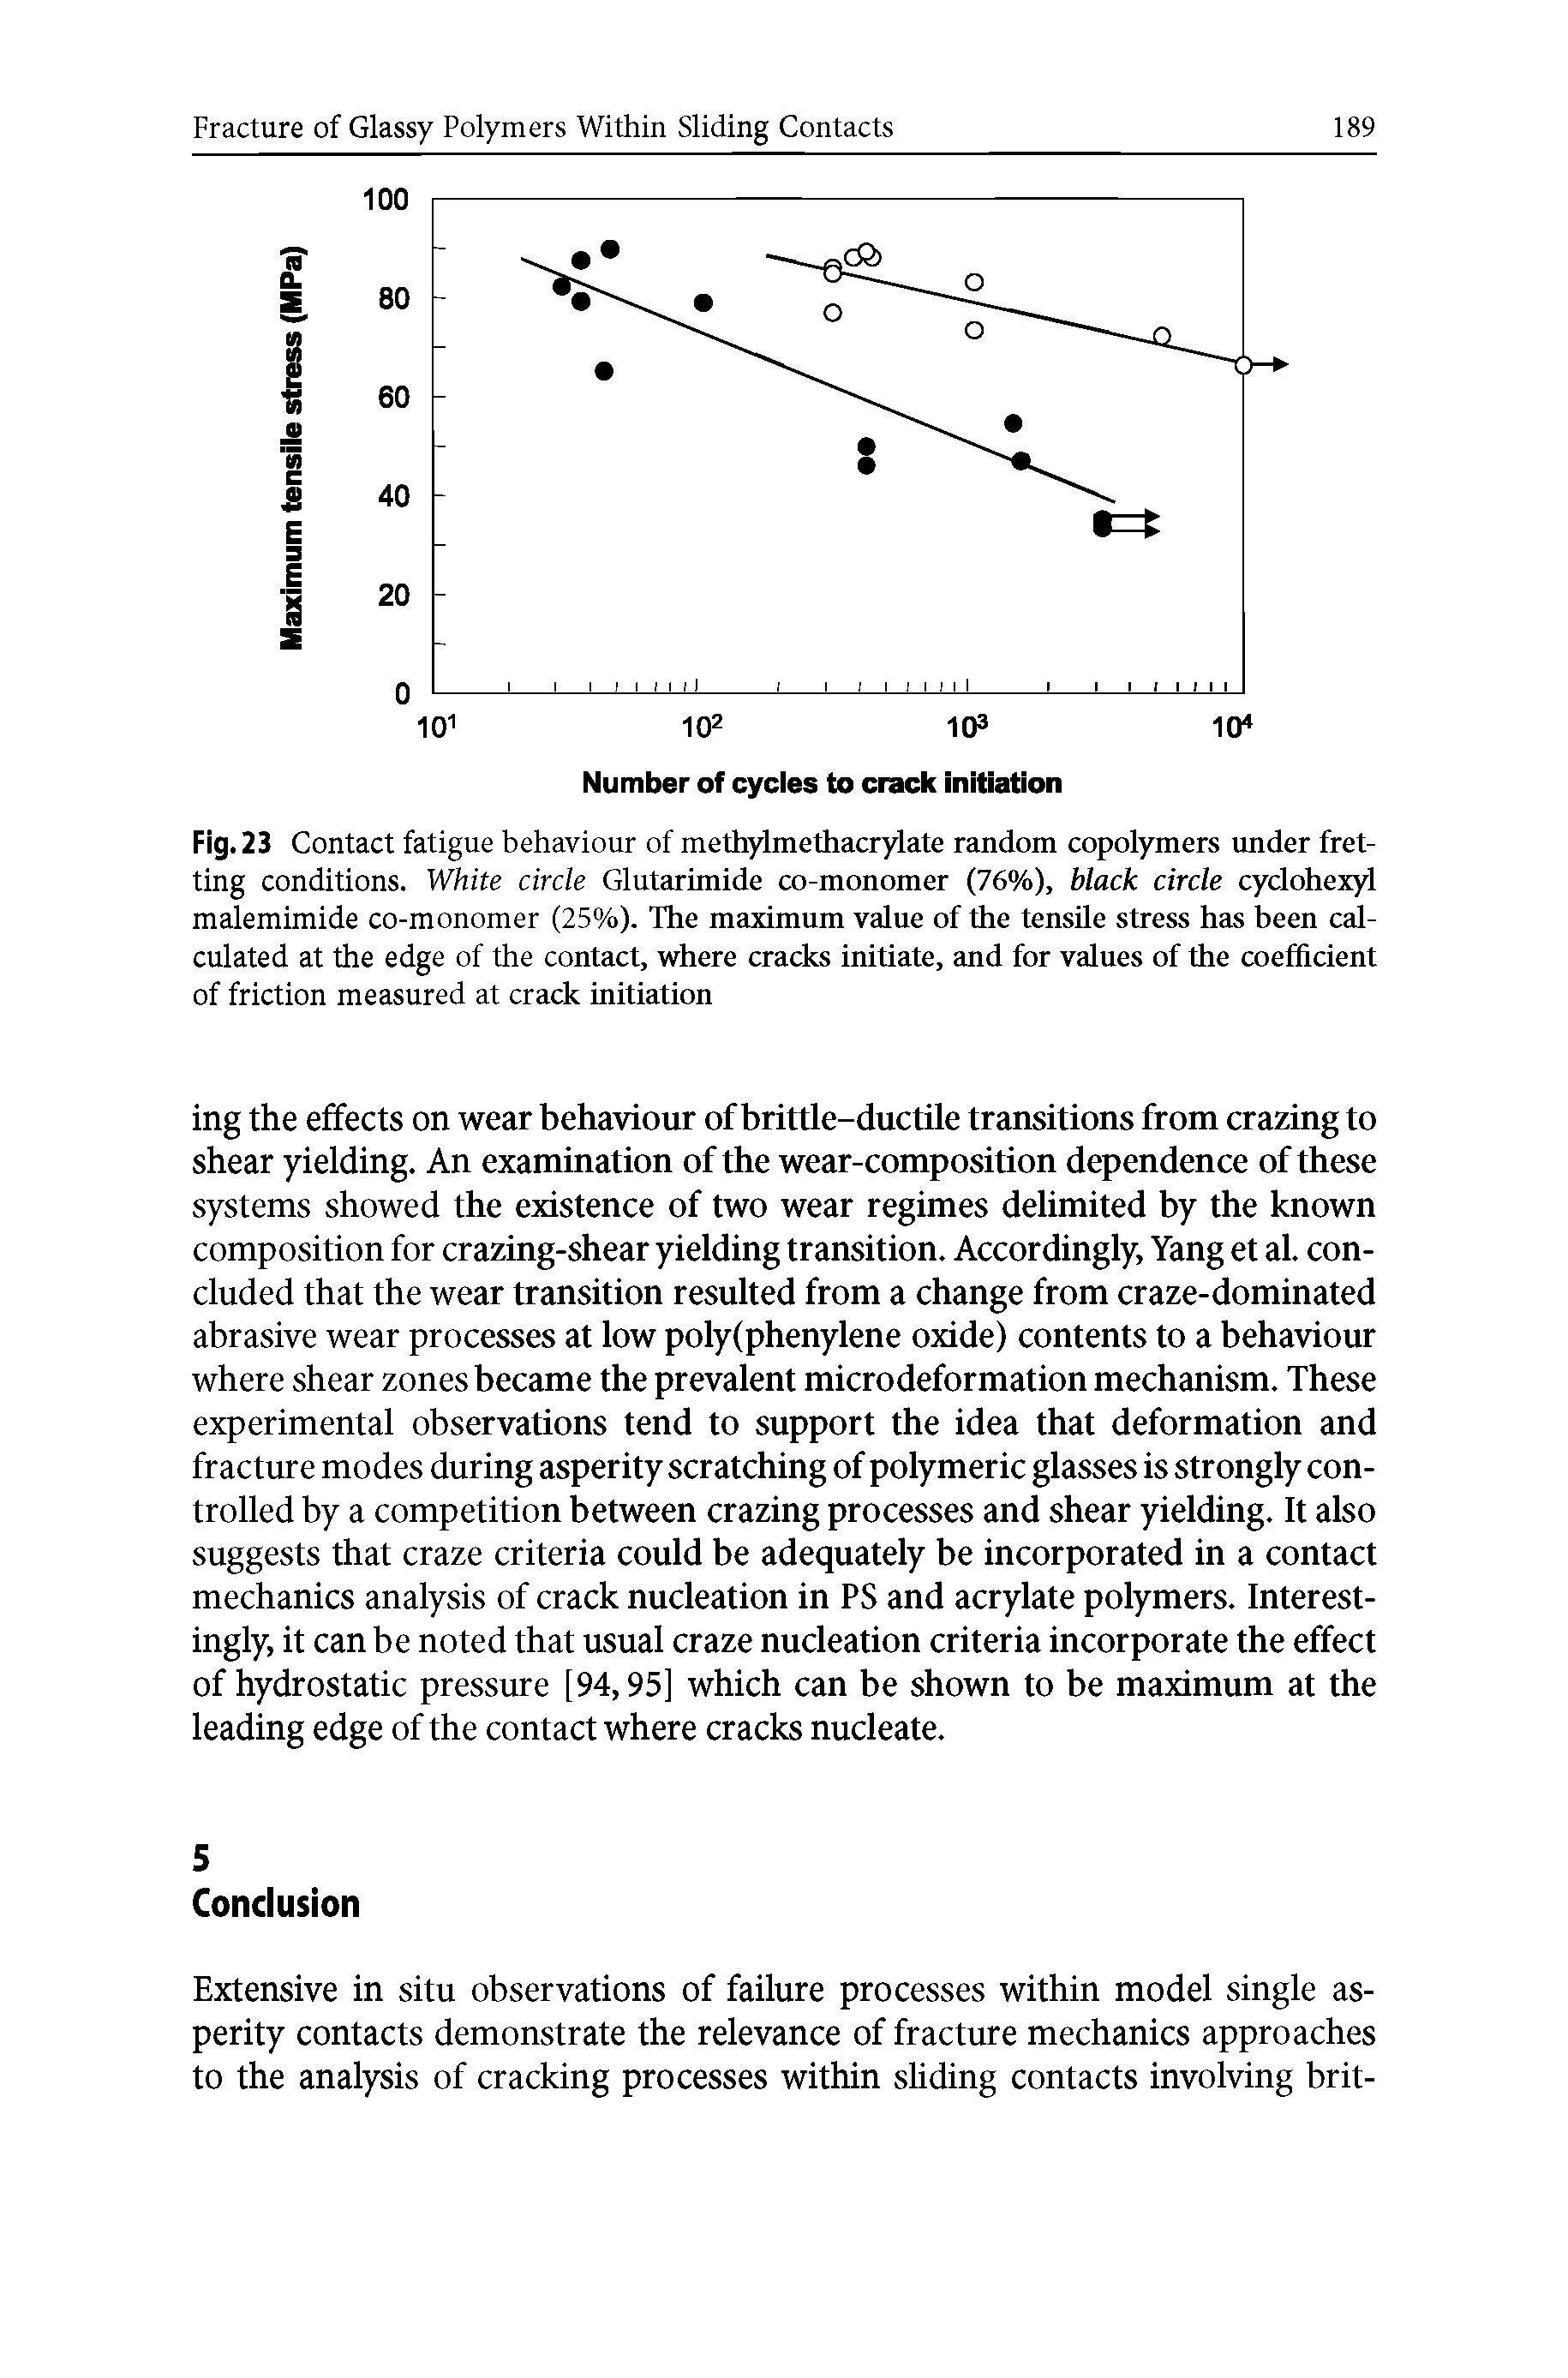 Fig. 23 Contact fatigue behaviour of methylmethacrylate random copolymers under fretting conditions. White circle Glutarimide co-monomer (76%), black circle cyclohexyl malemimide co-monomer (25%). The maximum value of the tensile stress has been calculated at the edge of the contact, where cracks initiate, and for values of the coefficient of friction measured at crack initiation...